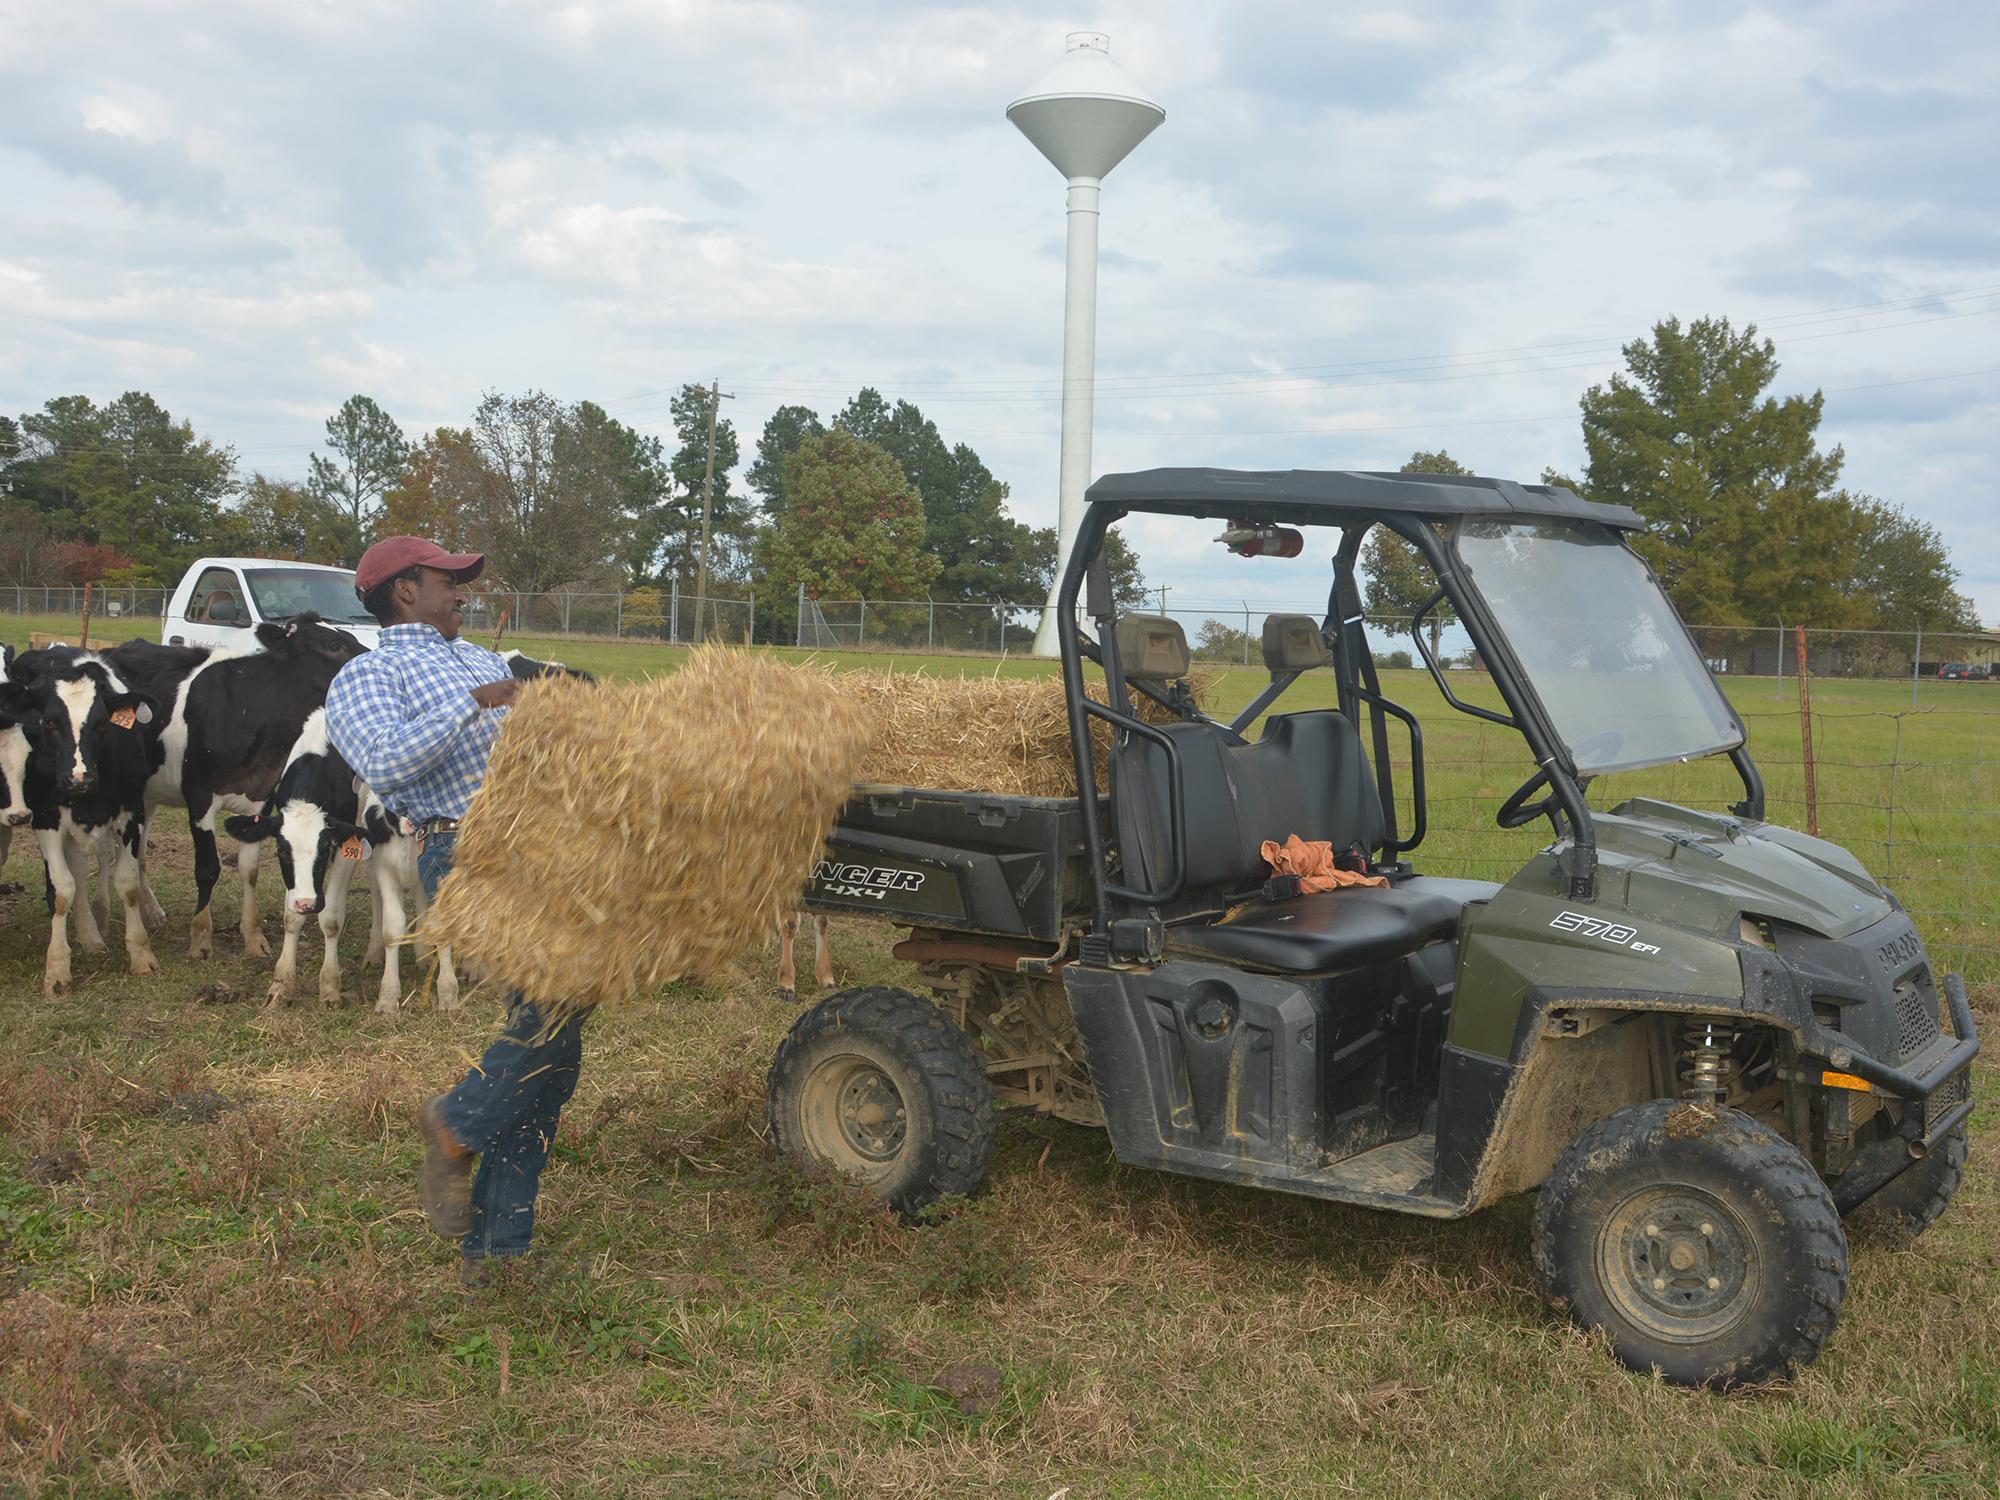 Young man strains to handle a bale of hay at the back of a farm utility vehicle in a pasture with black and white dairy heifers clustered behind and watching.